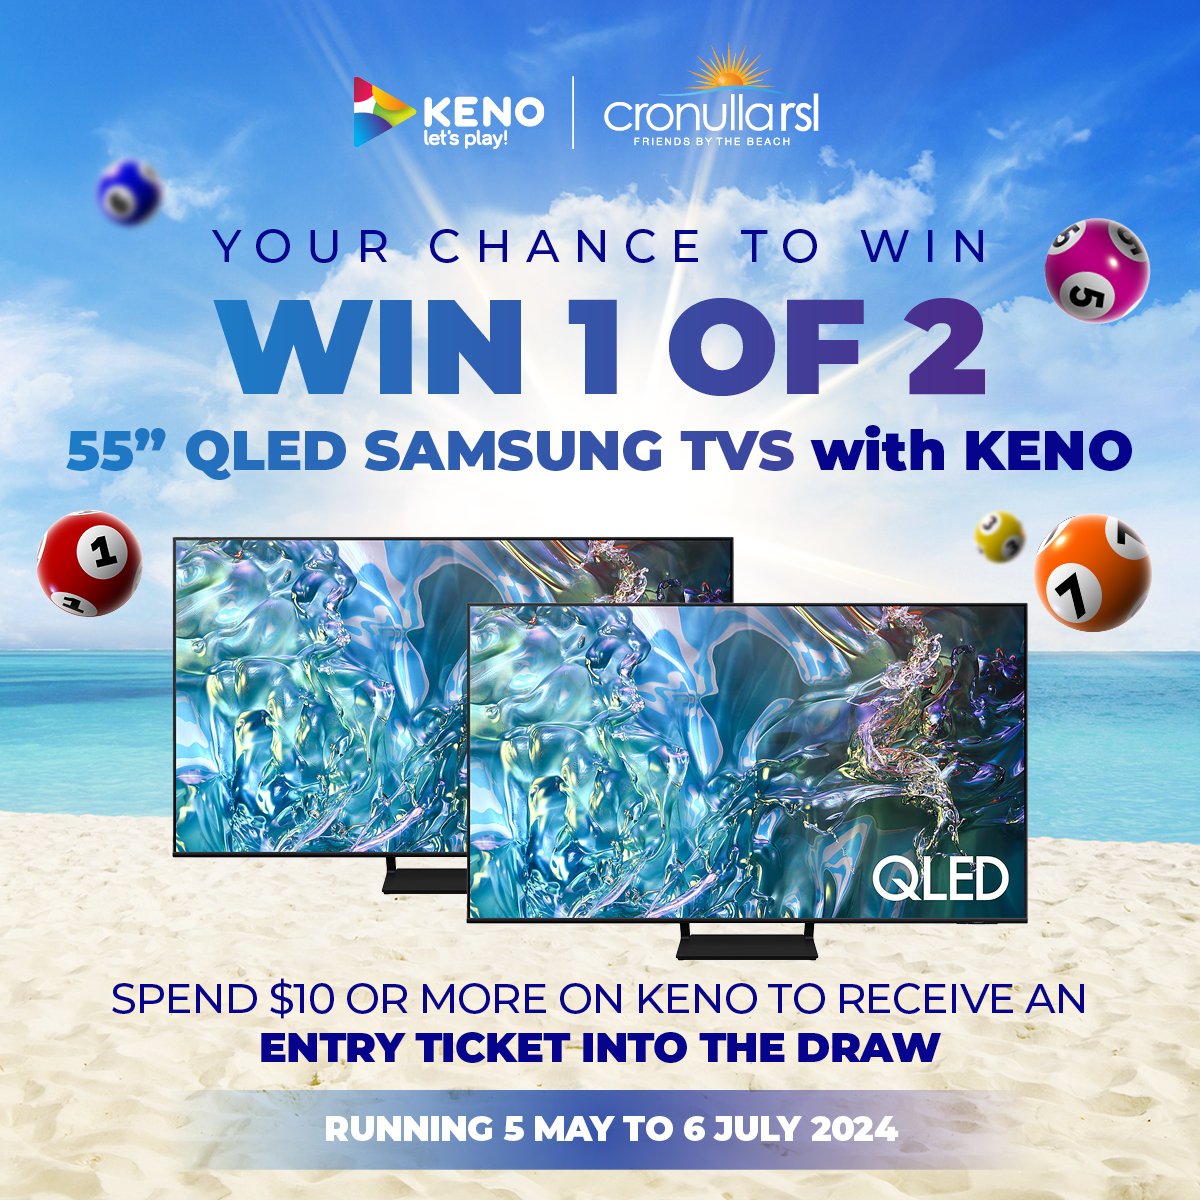 Get ready to elevate your entertainment experience with Keno! Spend $10 or more on Keno and stand a chance to win 1 of 2 sensational 55-inch QLED Samsung TVs! Every Keno play of $10 or more earns you an entry ticket into the draw. 

Running from 5 Ma